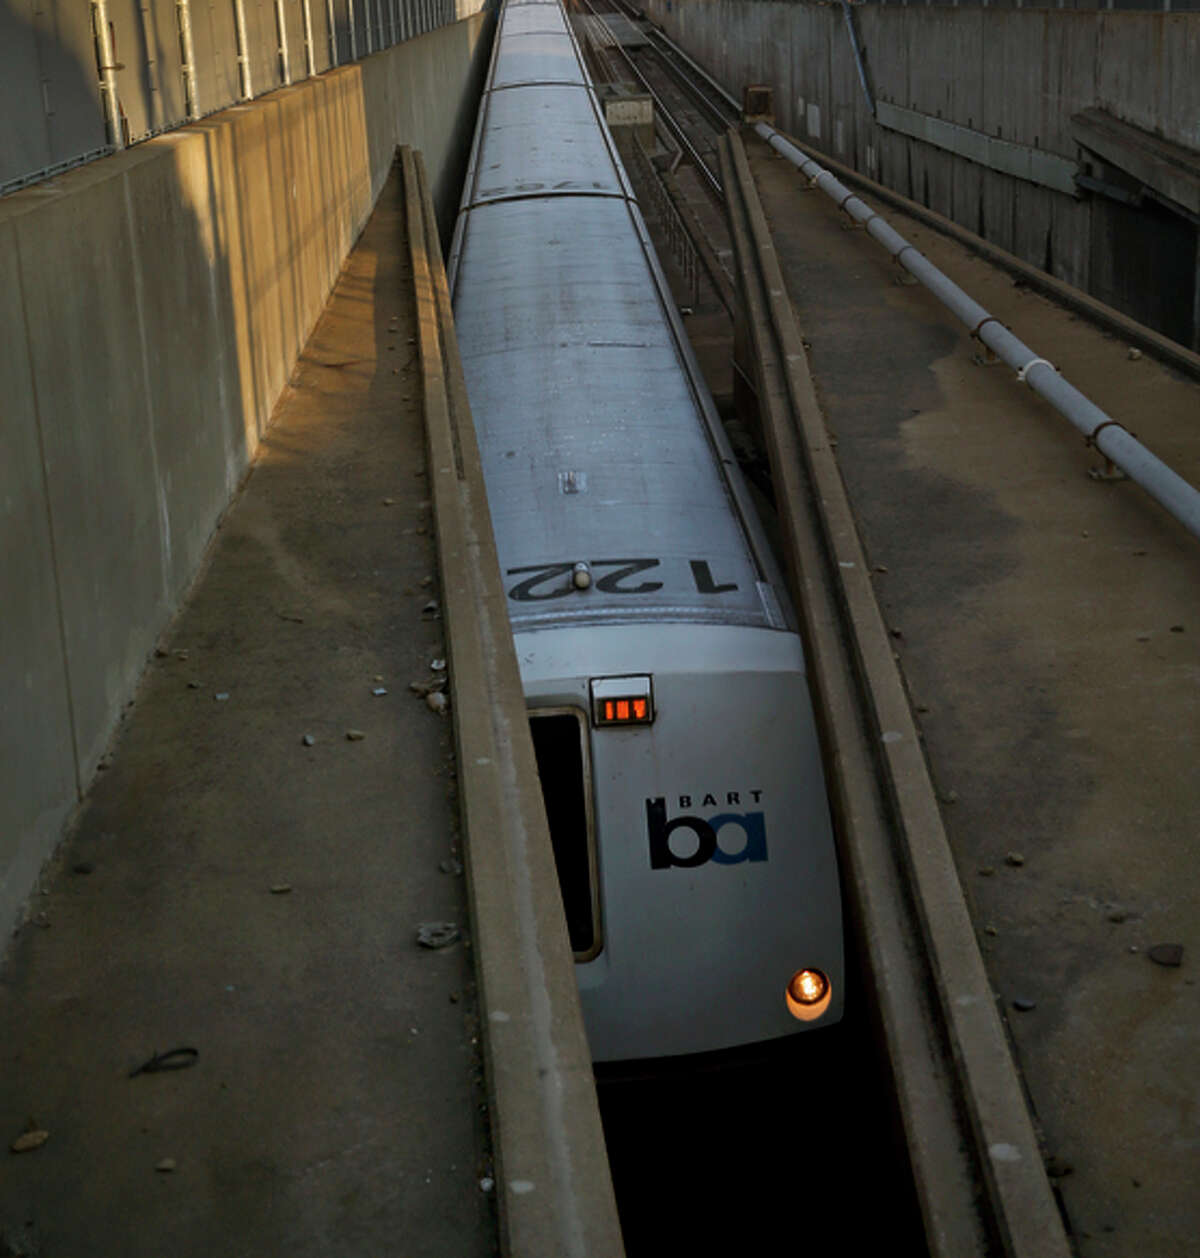 A BART train to San Francisco enters the transbay tunnel in Oakland. Where would a second transbay tube originate in the East Bay and arrive in S.F.?